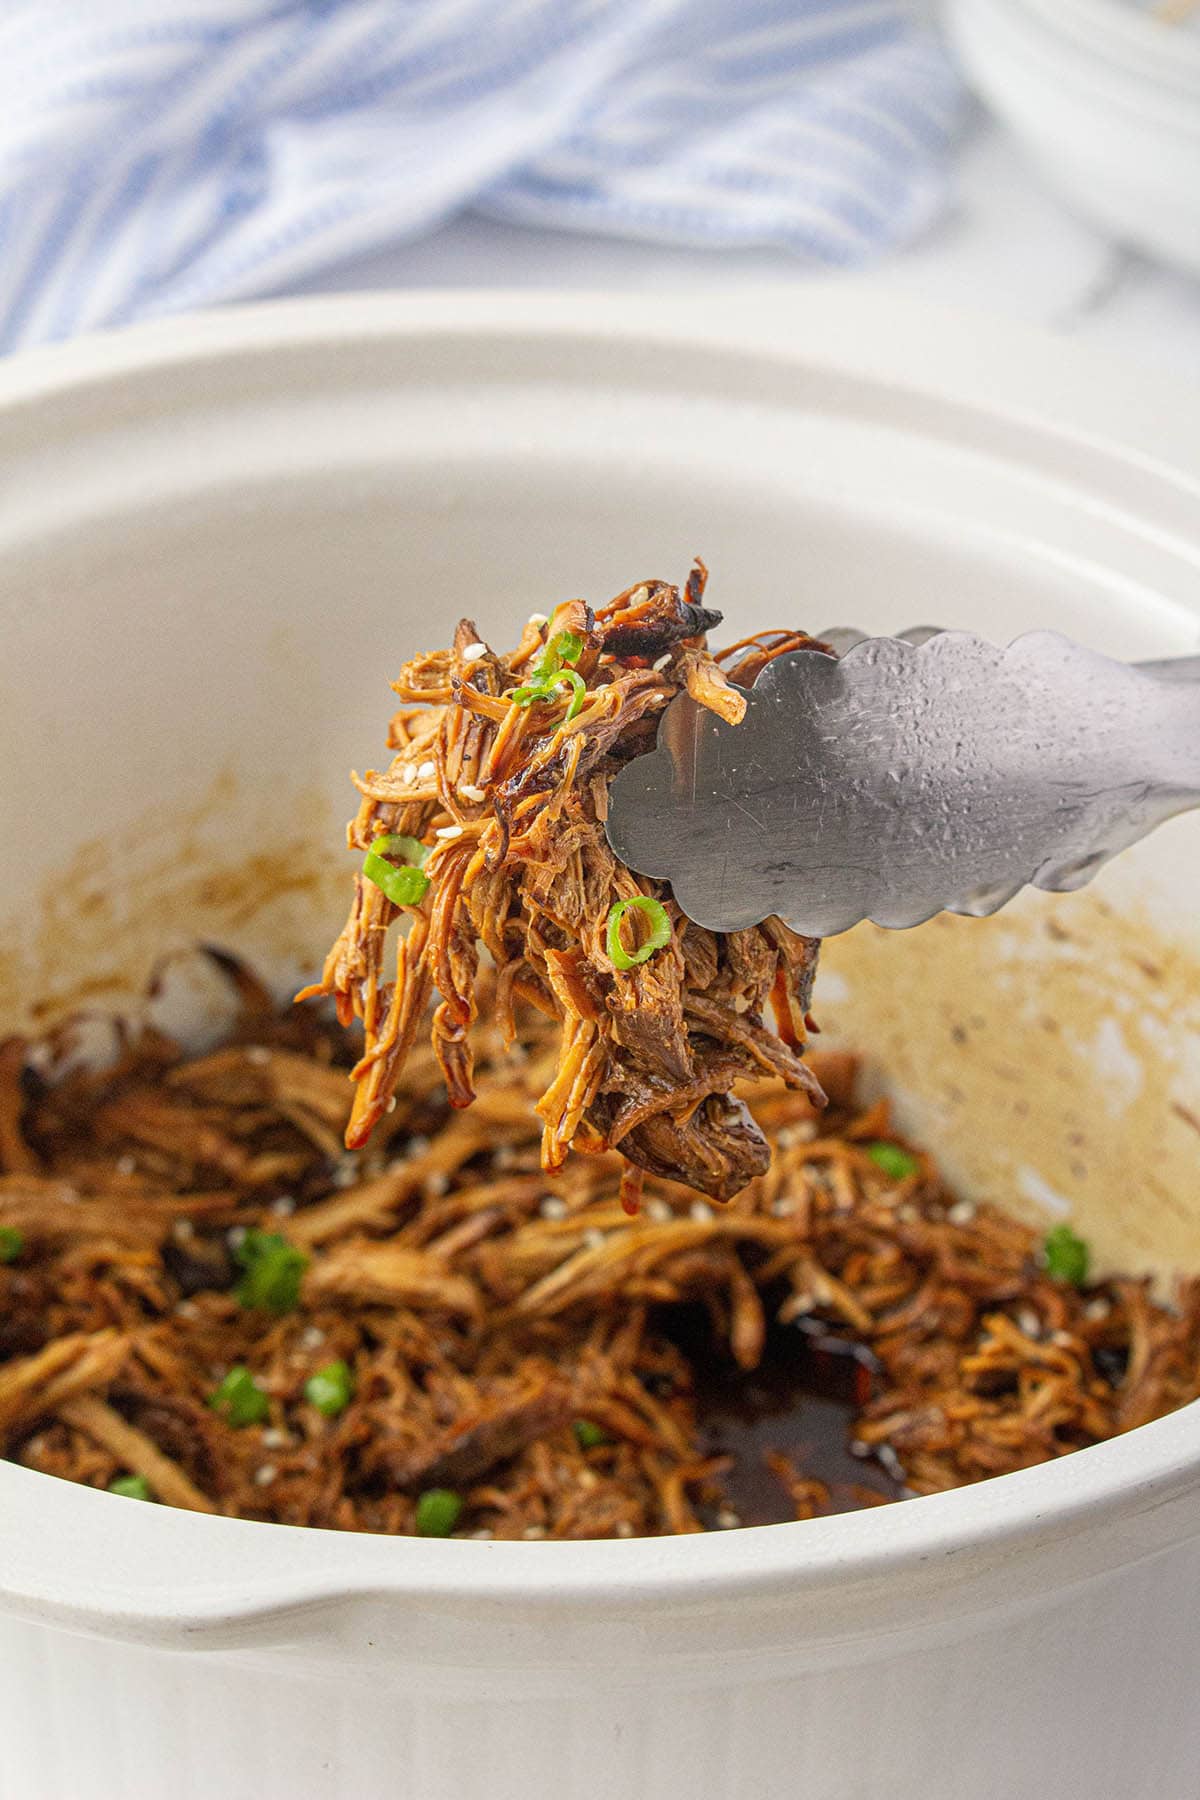 Shredded crock pot teriyaki chicken in slow cooker with serving tongs.